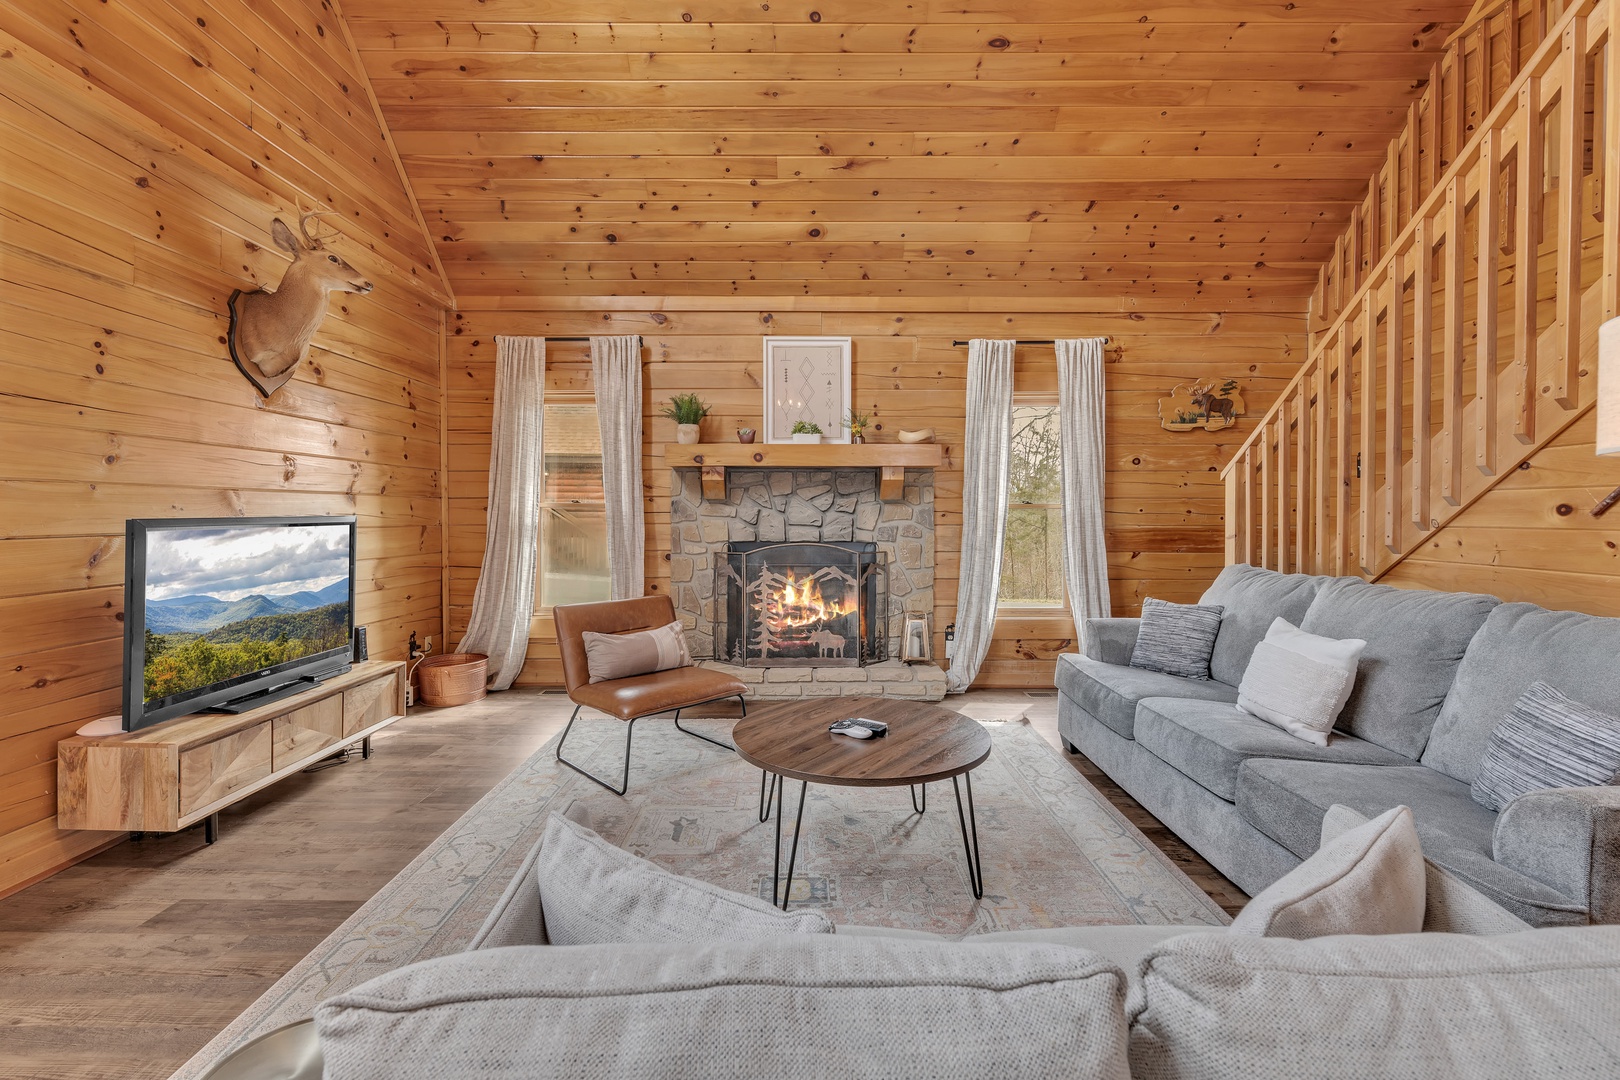 Gather in the spacious living area featuring generous seating, a Smart TV, and a cozy fireplace